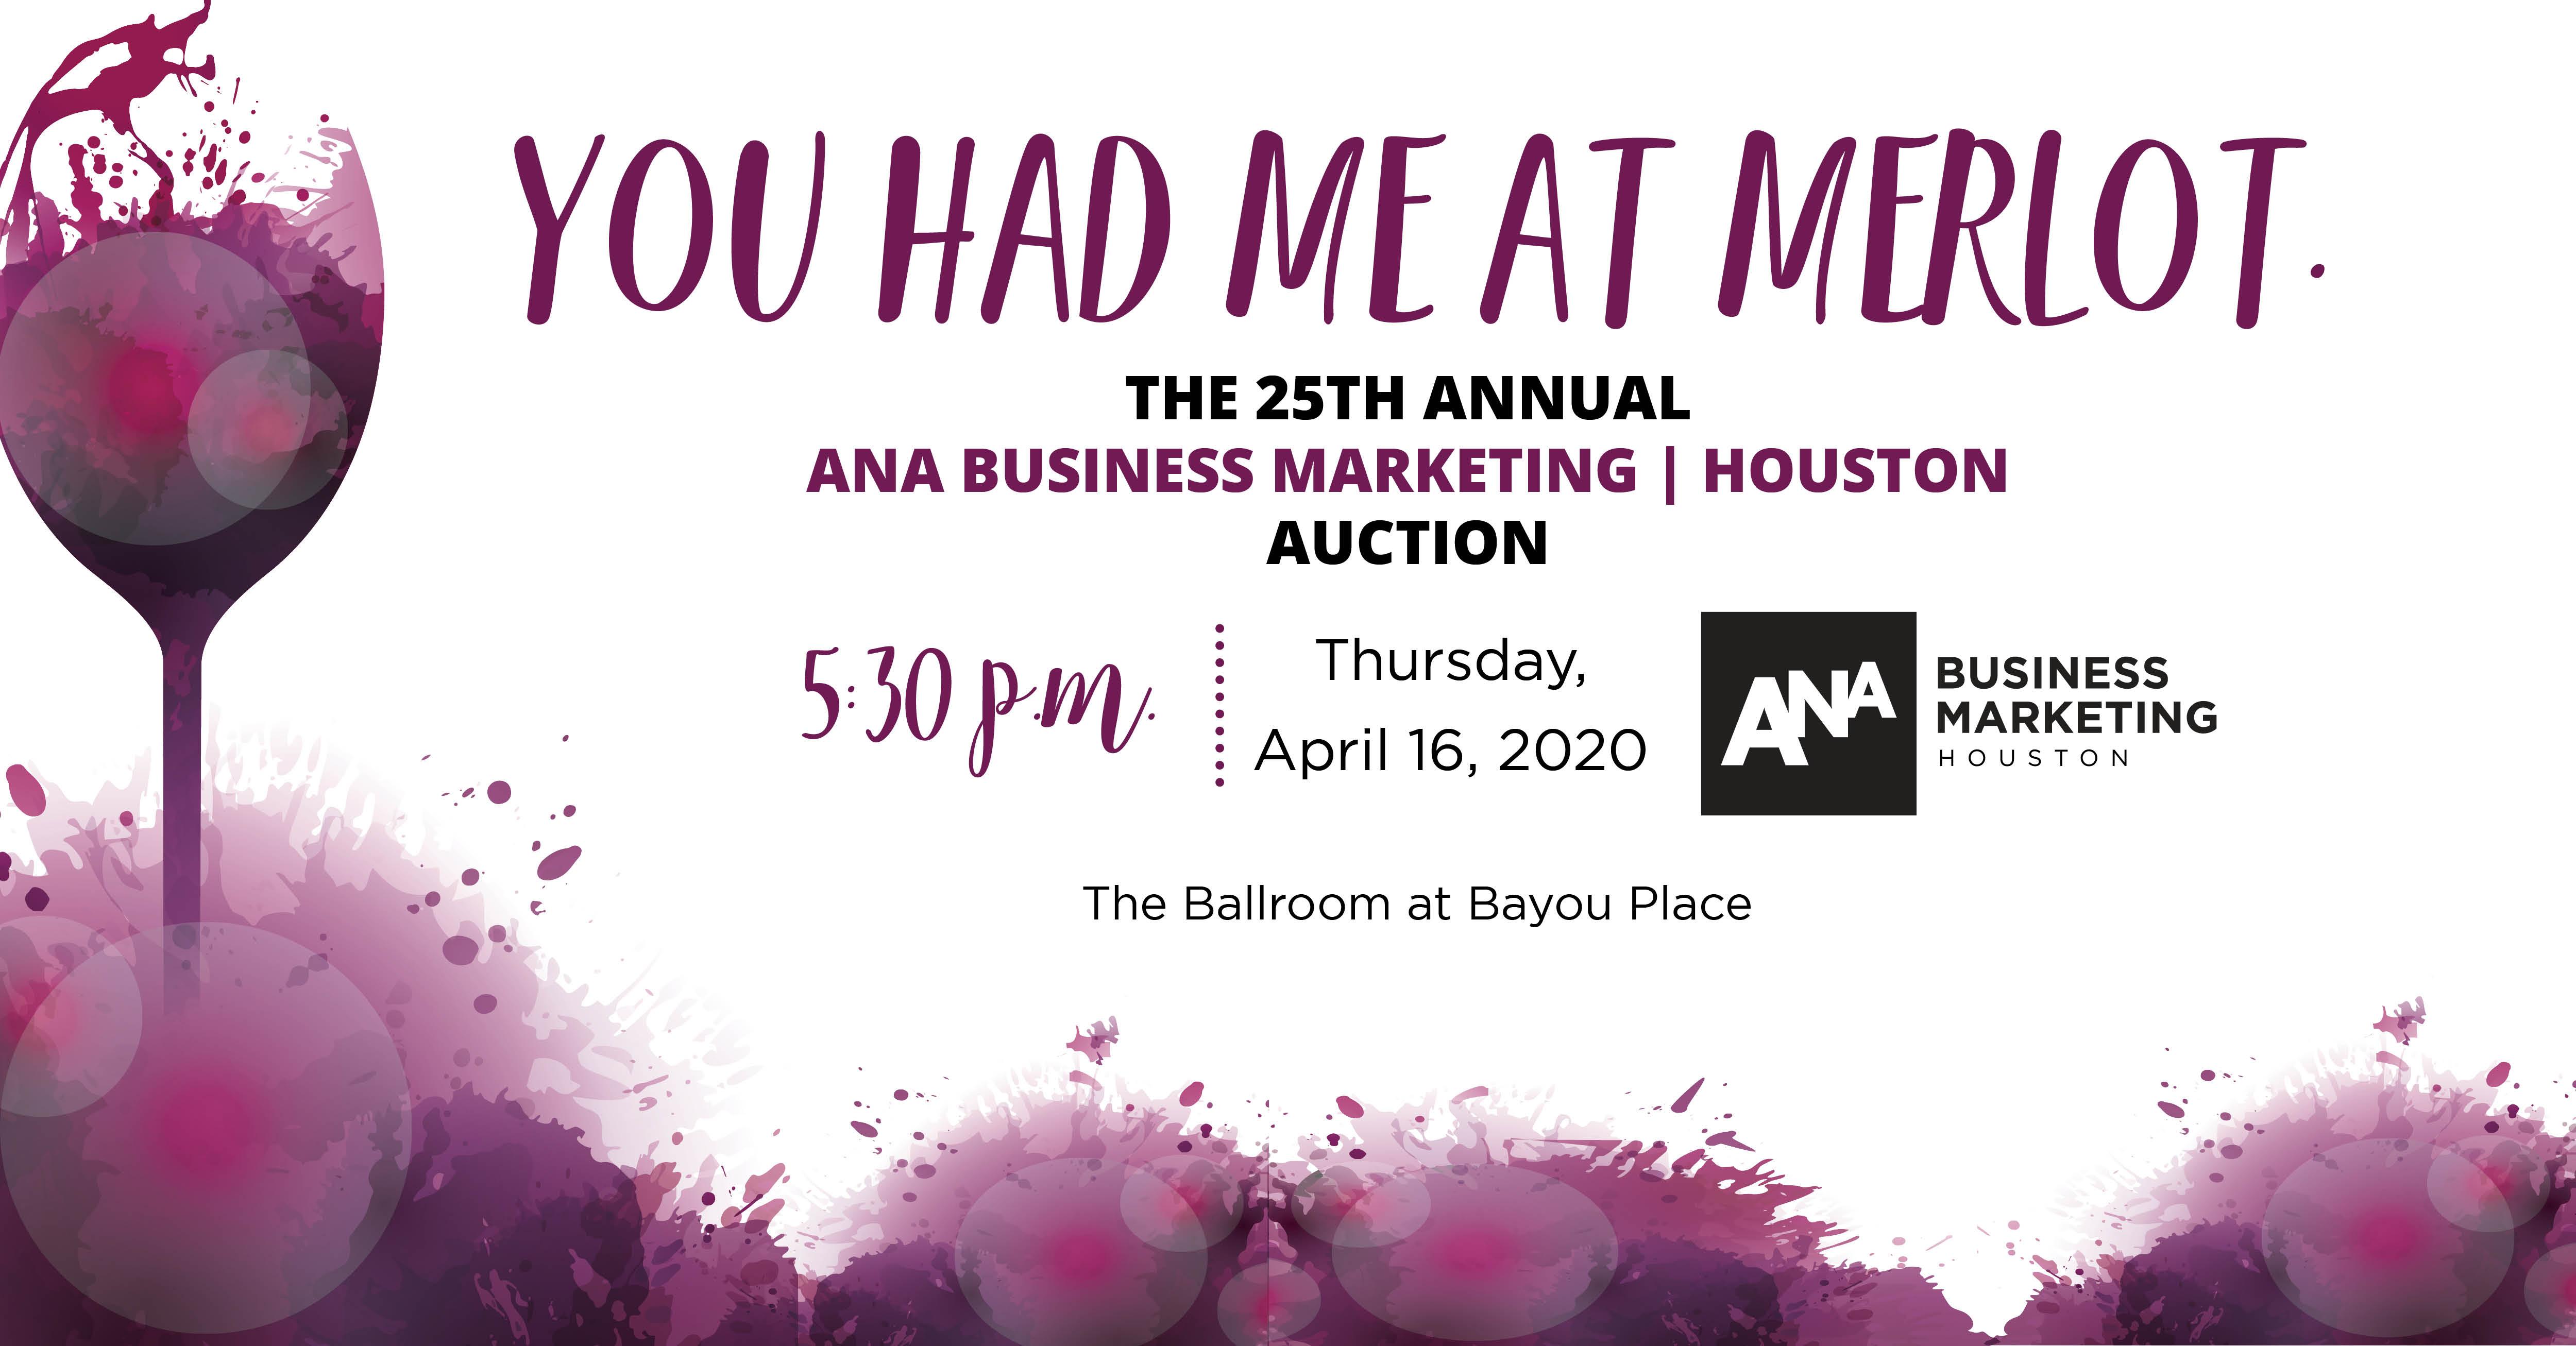 25th Annual ANA Business Marketing Houston Auction - POSTPONED